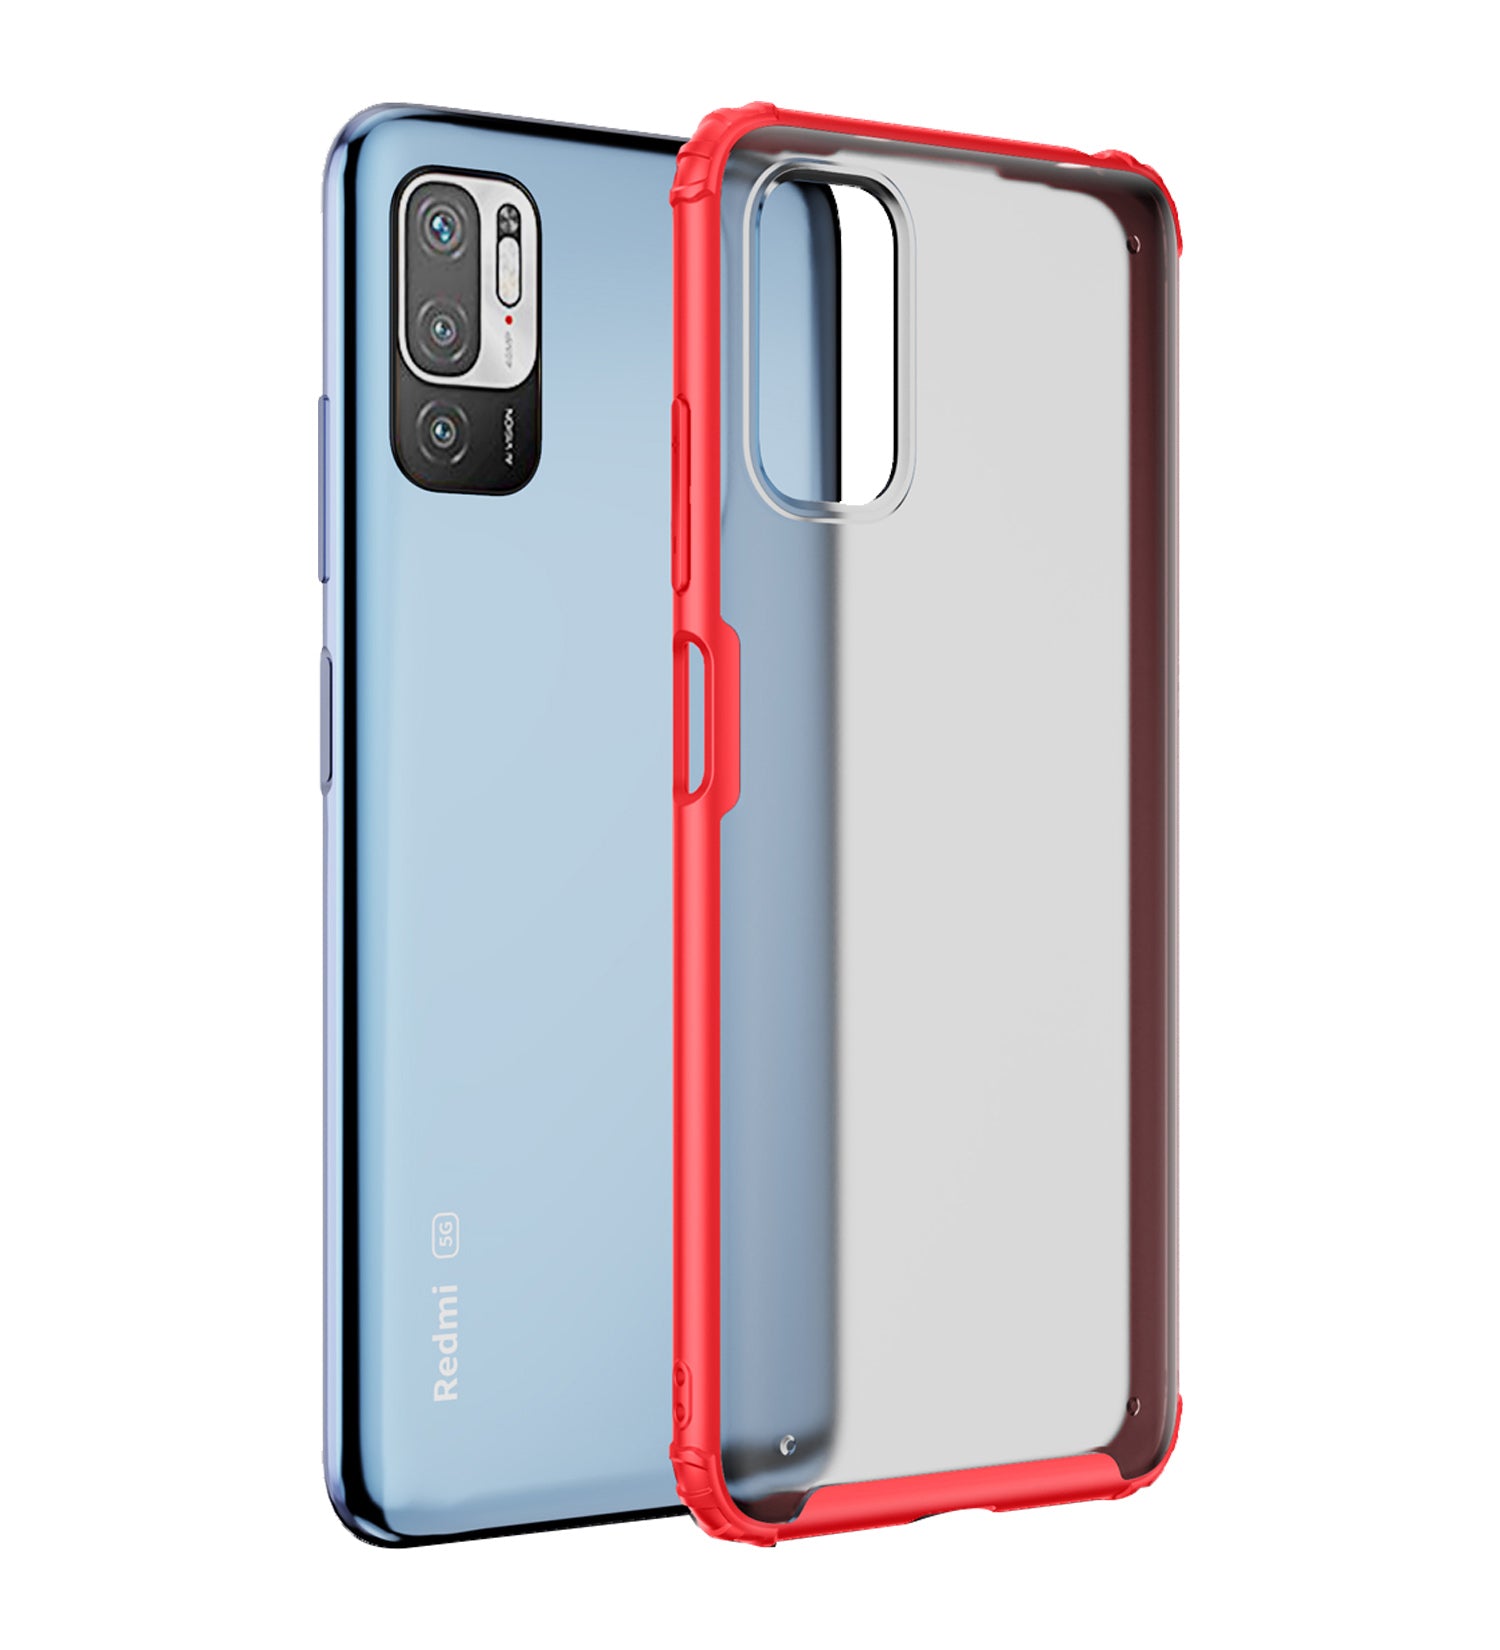 Back Cover For Redmi note 10t 5g | Back Case For Redmi note 10t 5g